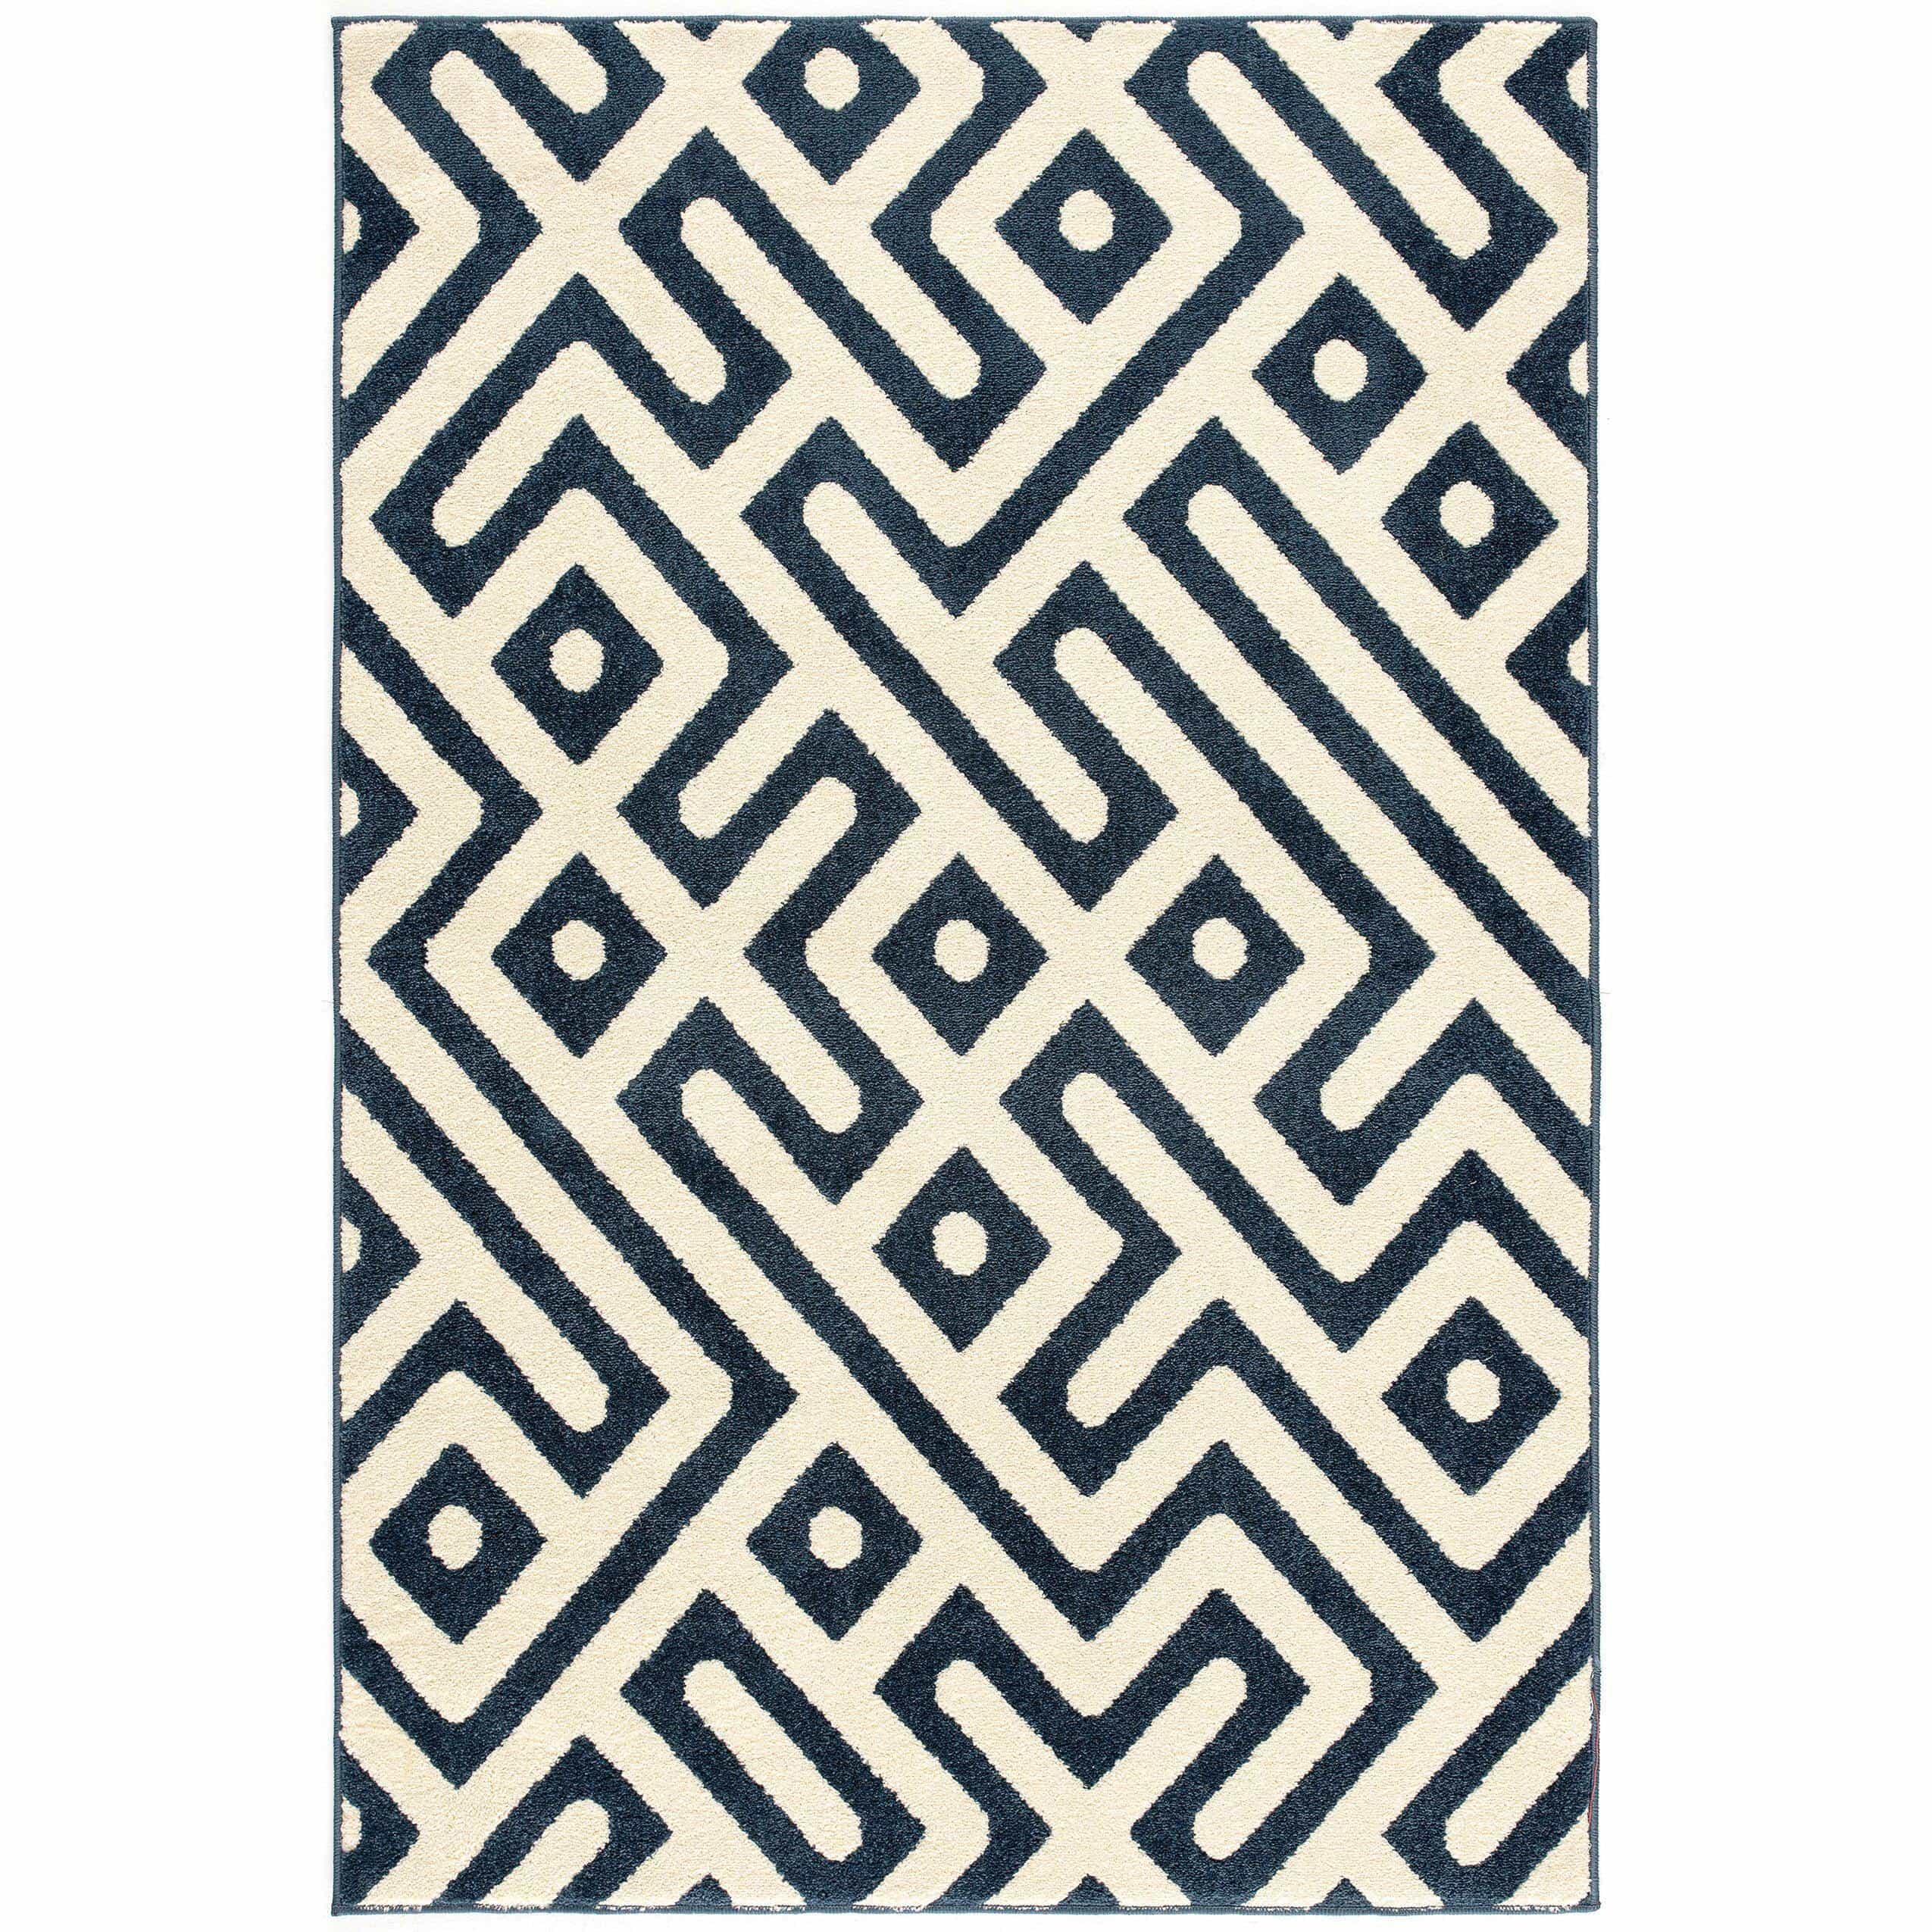 Hanover Hanover 4 Ft. x 6 Ft. Indoor/Outdoor Backless Rug with 5000 Hours of UV Protection - Greek Key Royal Blue